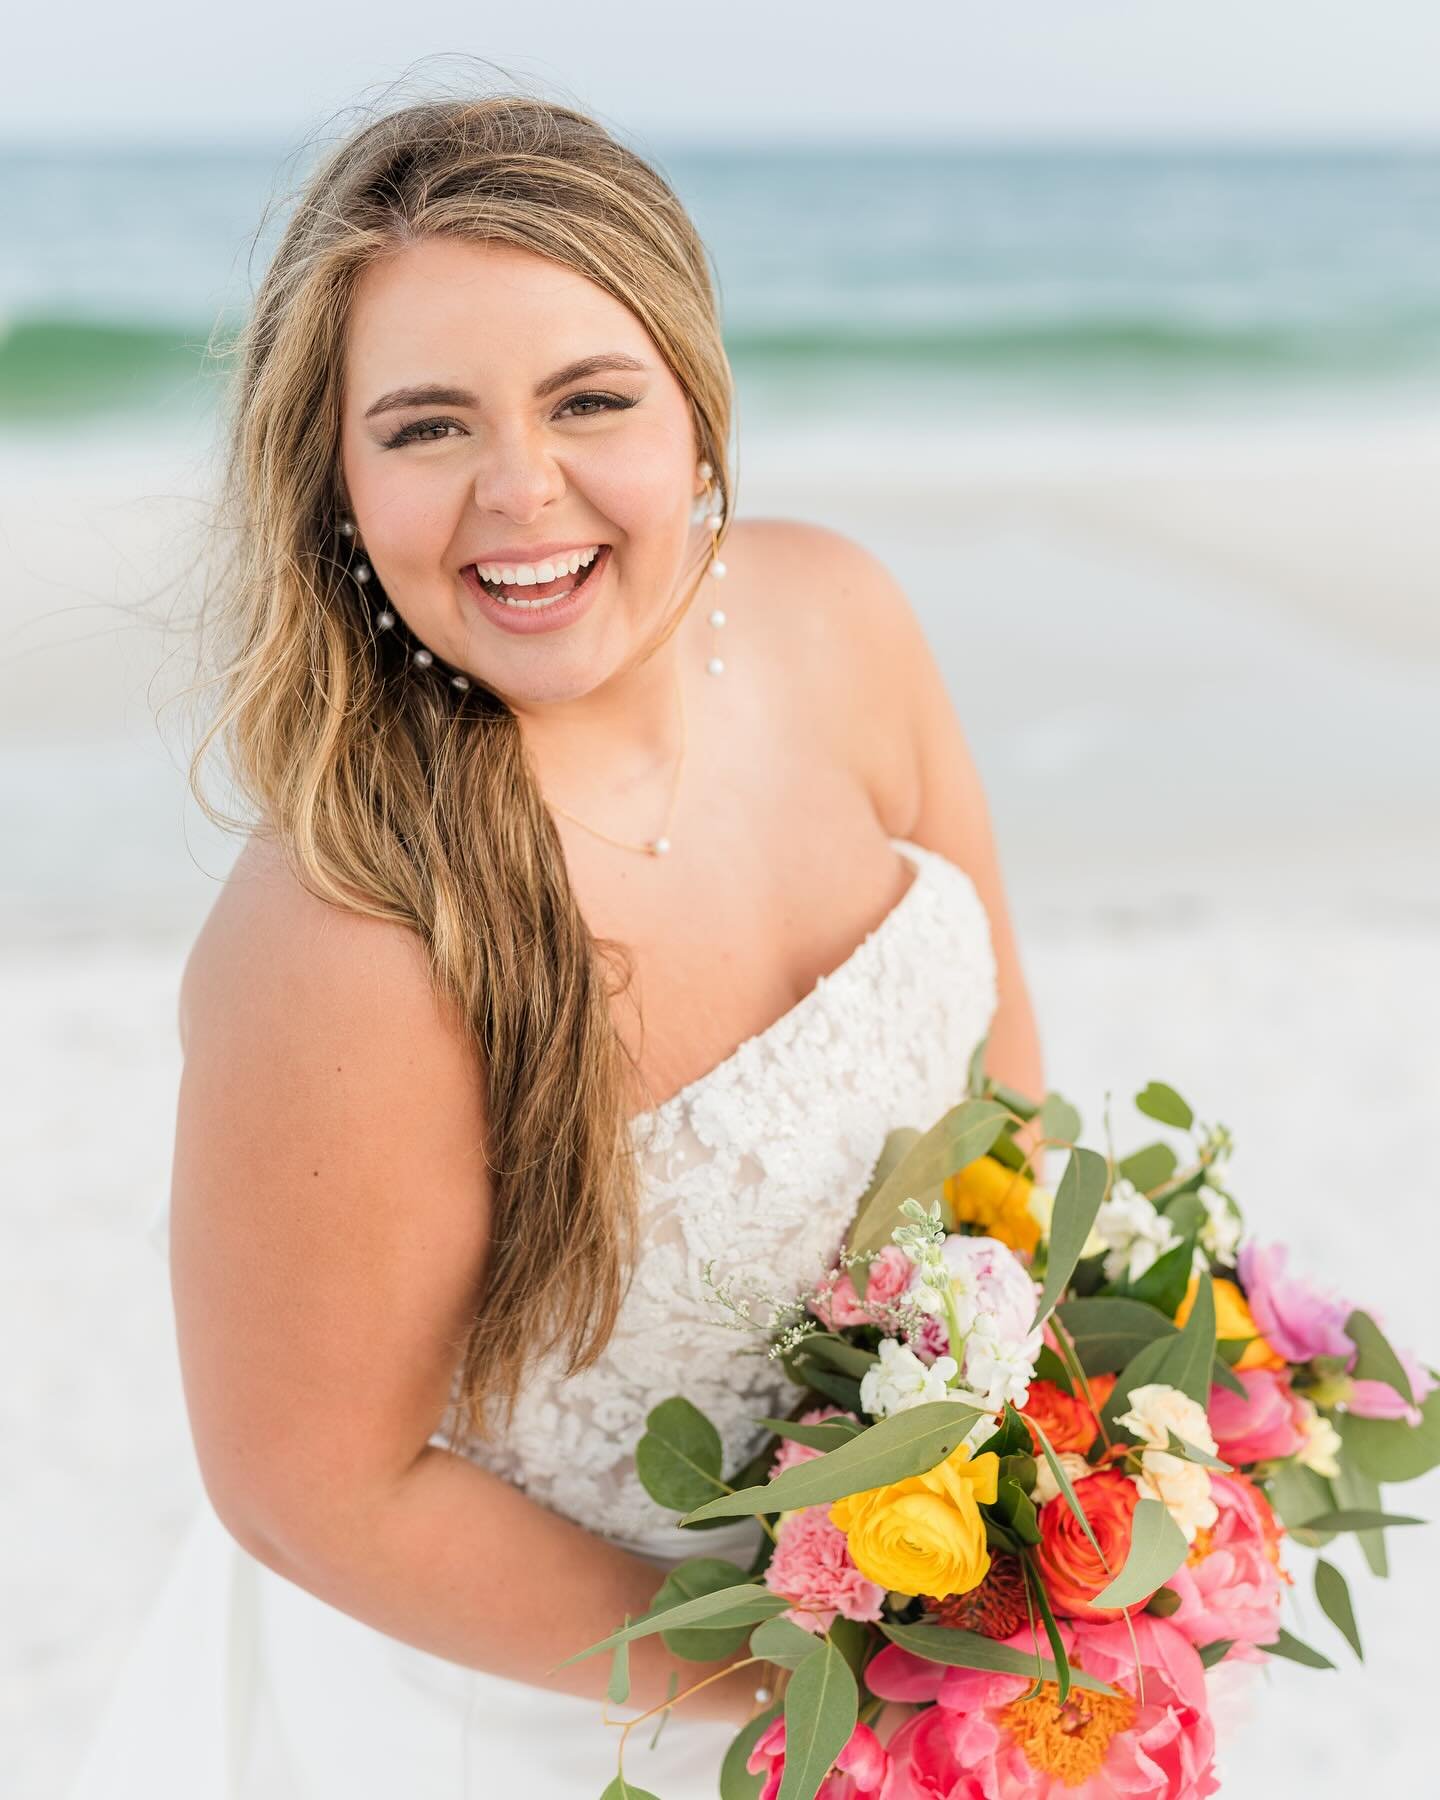 I&rsquo;m going to be staring at these sneak peeks all day!! I love the bright vibrant colors that Laine chose for their big day 💕 

#pensacolabeach #pensacolabeachwedding #pensacolabeachweddingphotographer #alabamaweddings #alabamaweddingphotograph